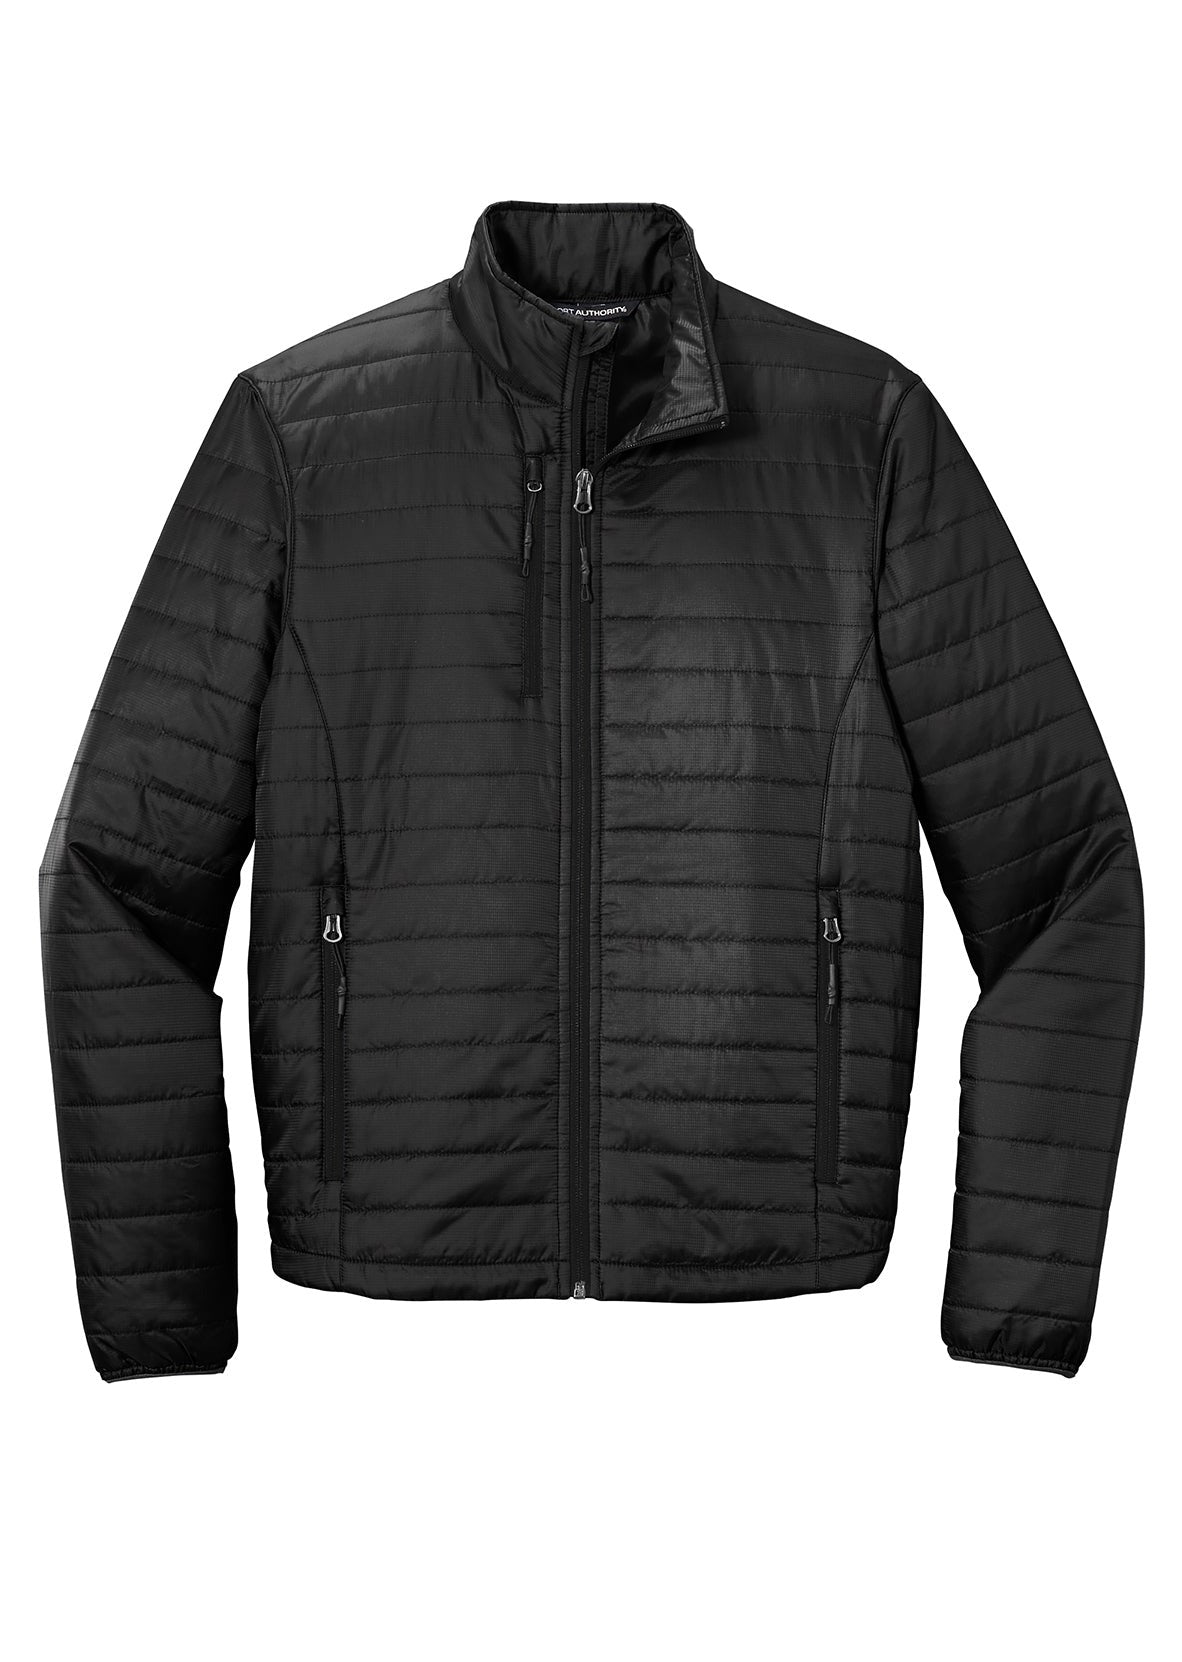 Port Authority® Packable Puffy Jacket J850